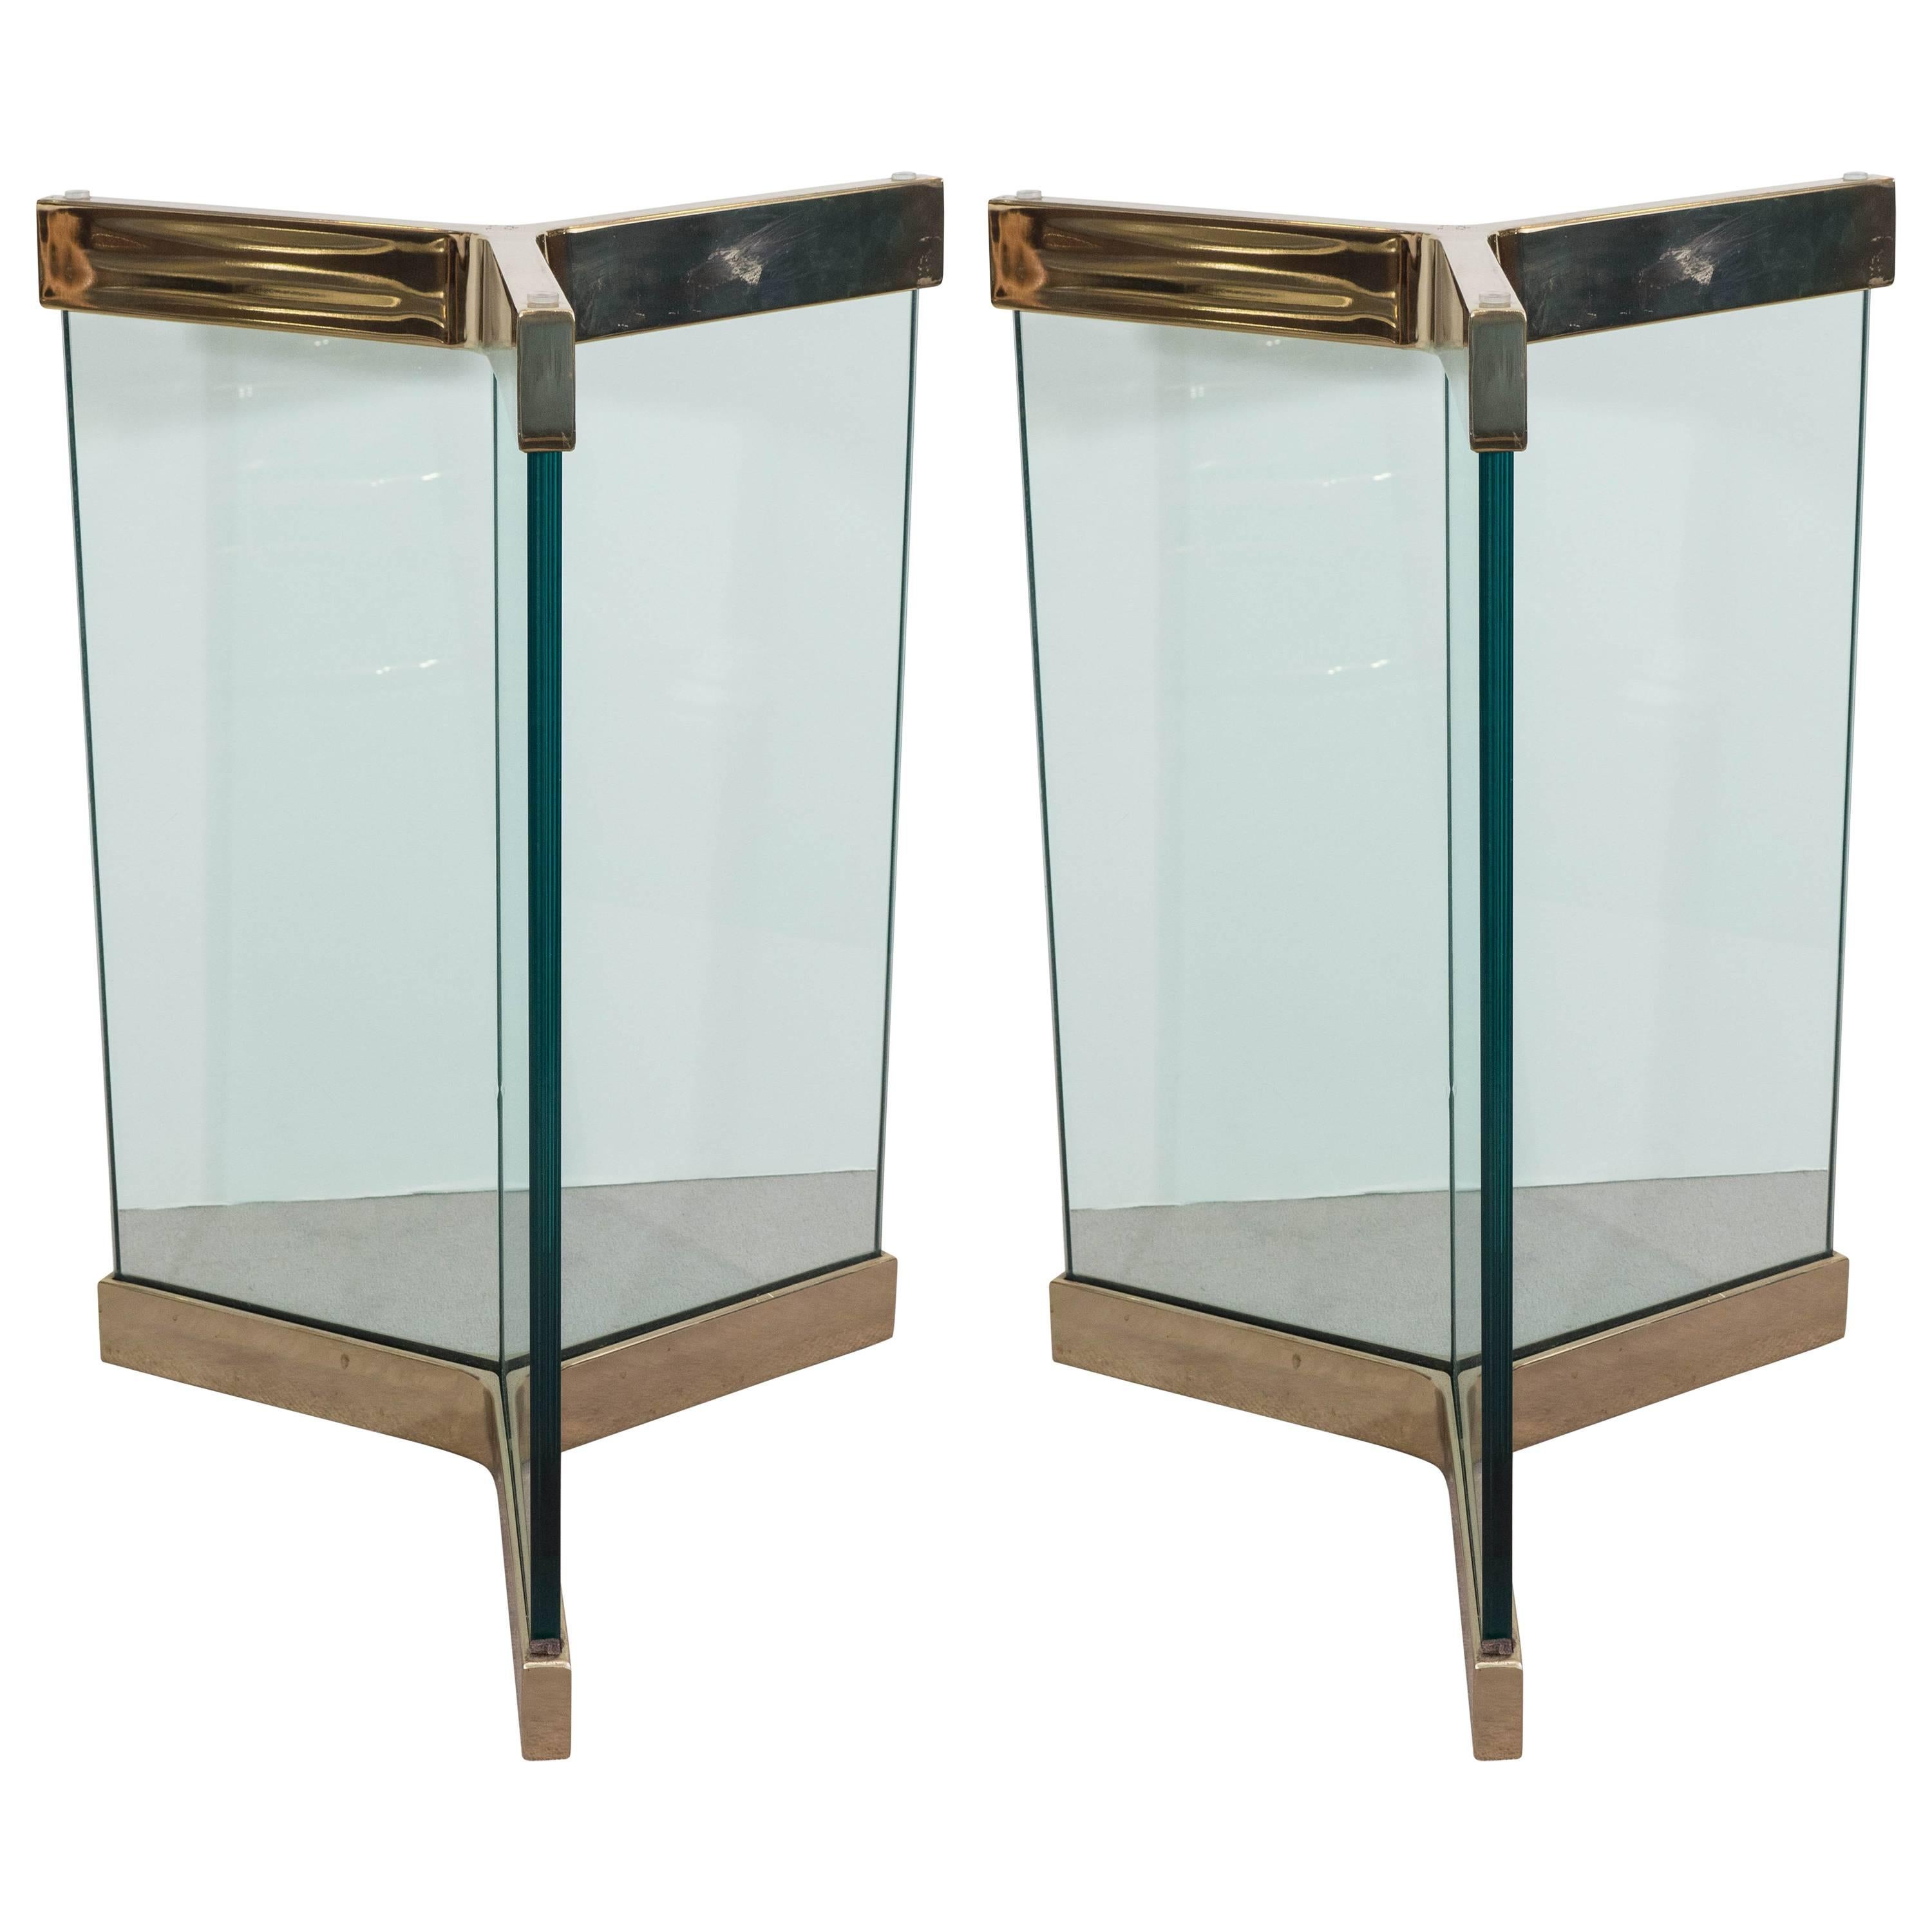 Pair of Leon Rosen Glass and Brass Dining Table Bases for Pace Collection